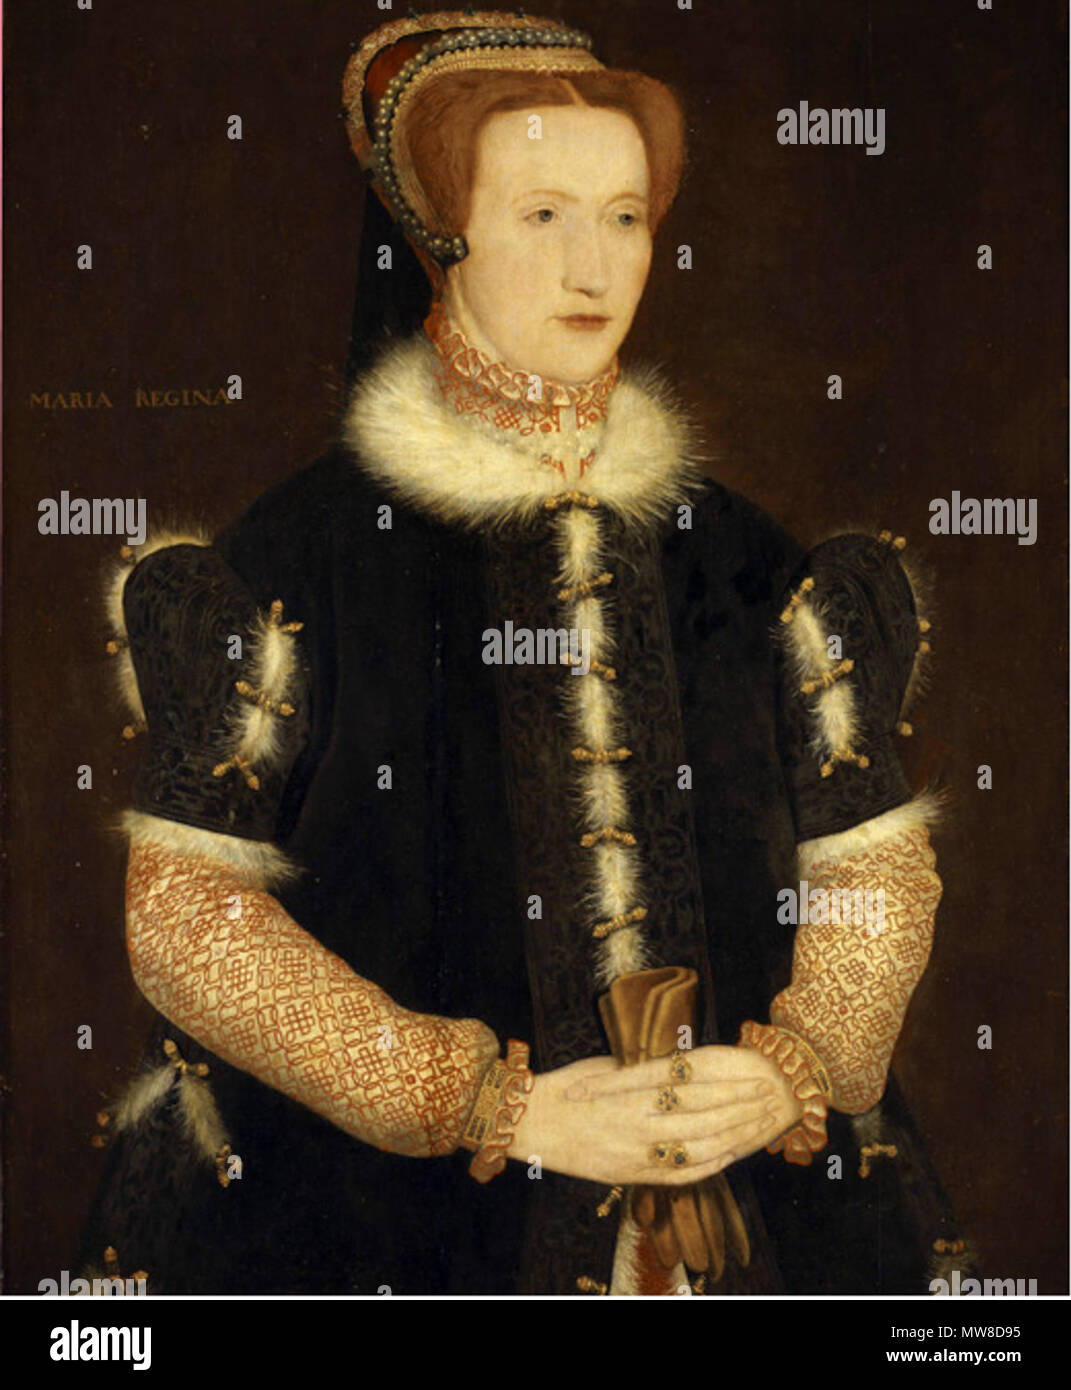 . Bess of Hardwick (later Elizabeth Countess of Shrewsbury) when Mistress St Lo, 1550s. A later inscription incorrectly identifies her as Mary I. 1550s. Unknown 83 Bess of Hardwick as Mistress St Lo Stock Photo